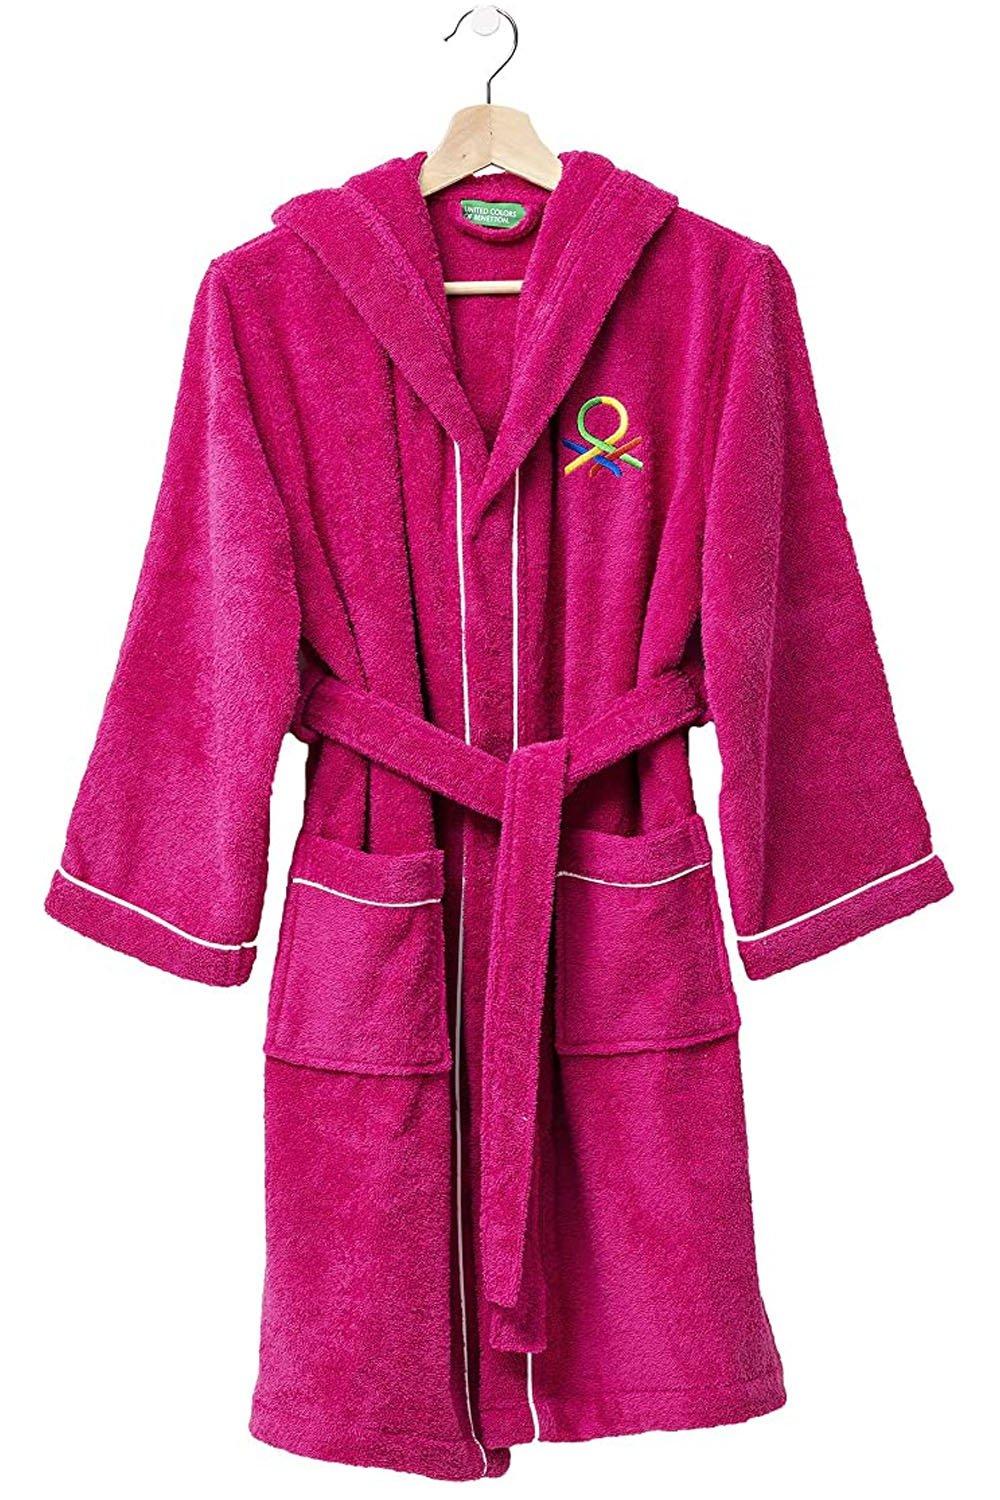 United Colors 100% Cotton Kids Bathrobe with Hoodie 7-9 Years Old Pink